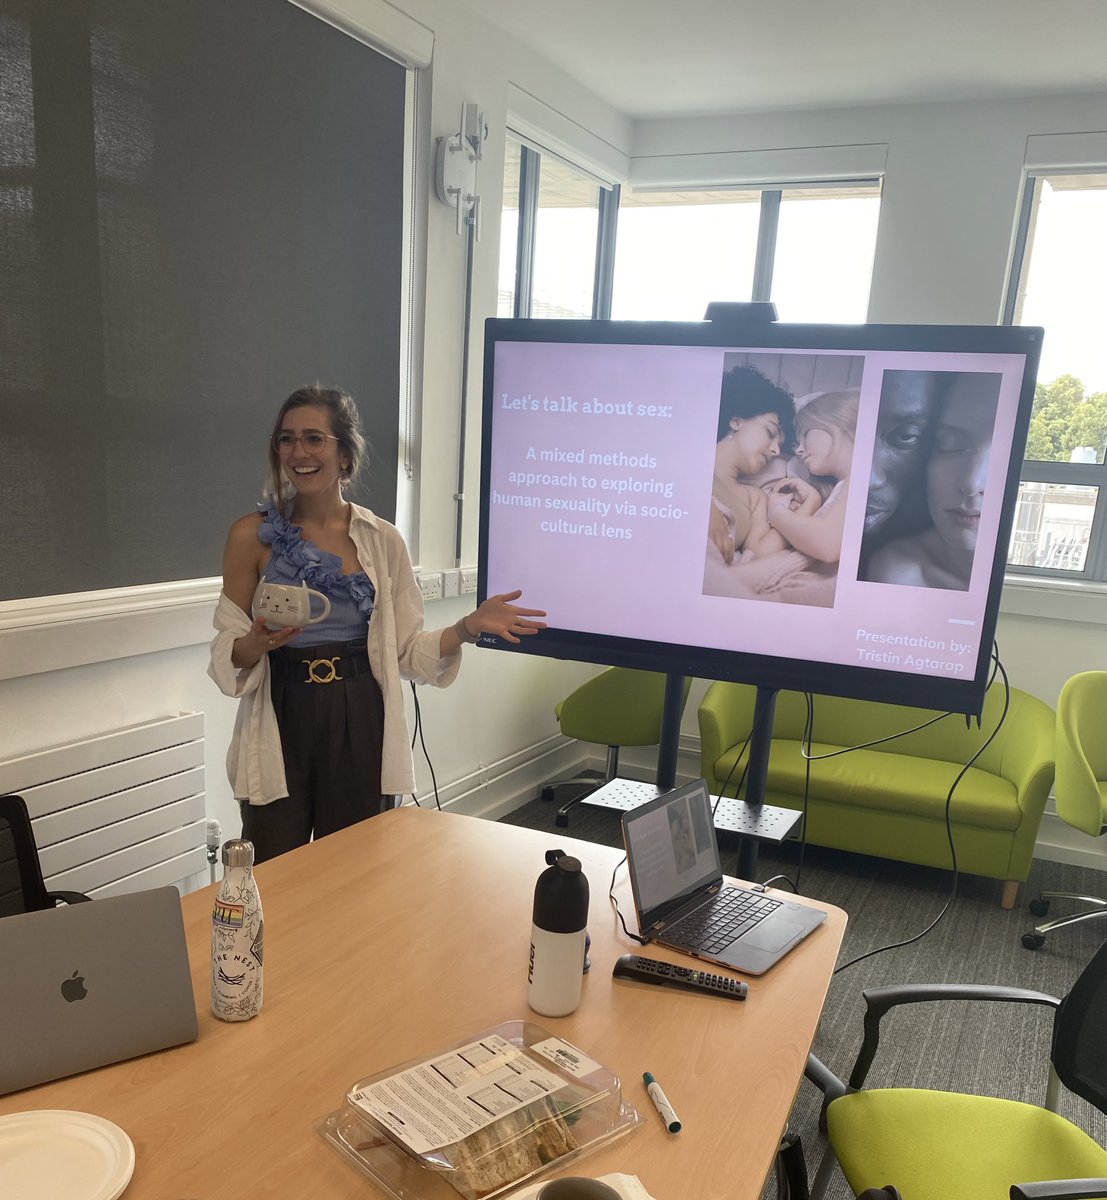 Had so much fun chatting about the different methods I’ve used to approach  #humansexuality research throughout my PhD @BrunelPsy!Thanks for inviting me @SamFerr83542201 - it was a ✨pleasure✨ !! 
.
.
P.S. Cat mugs assist w/ audience engagement 😽